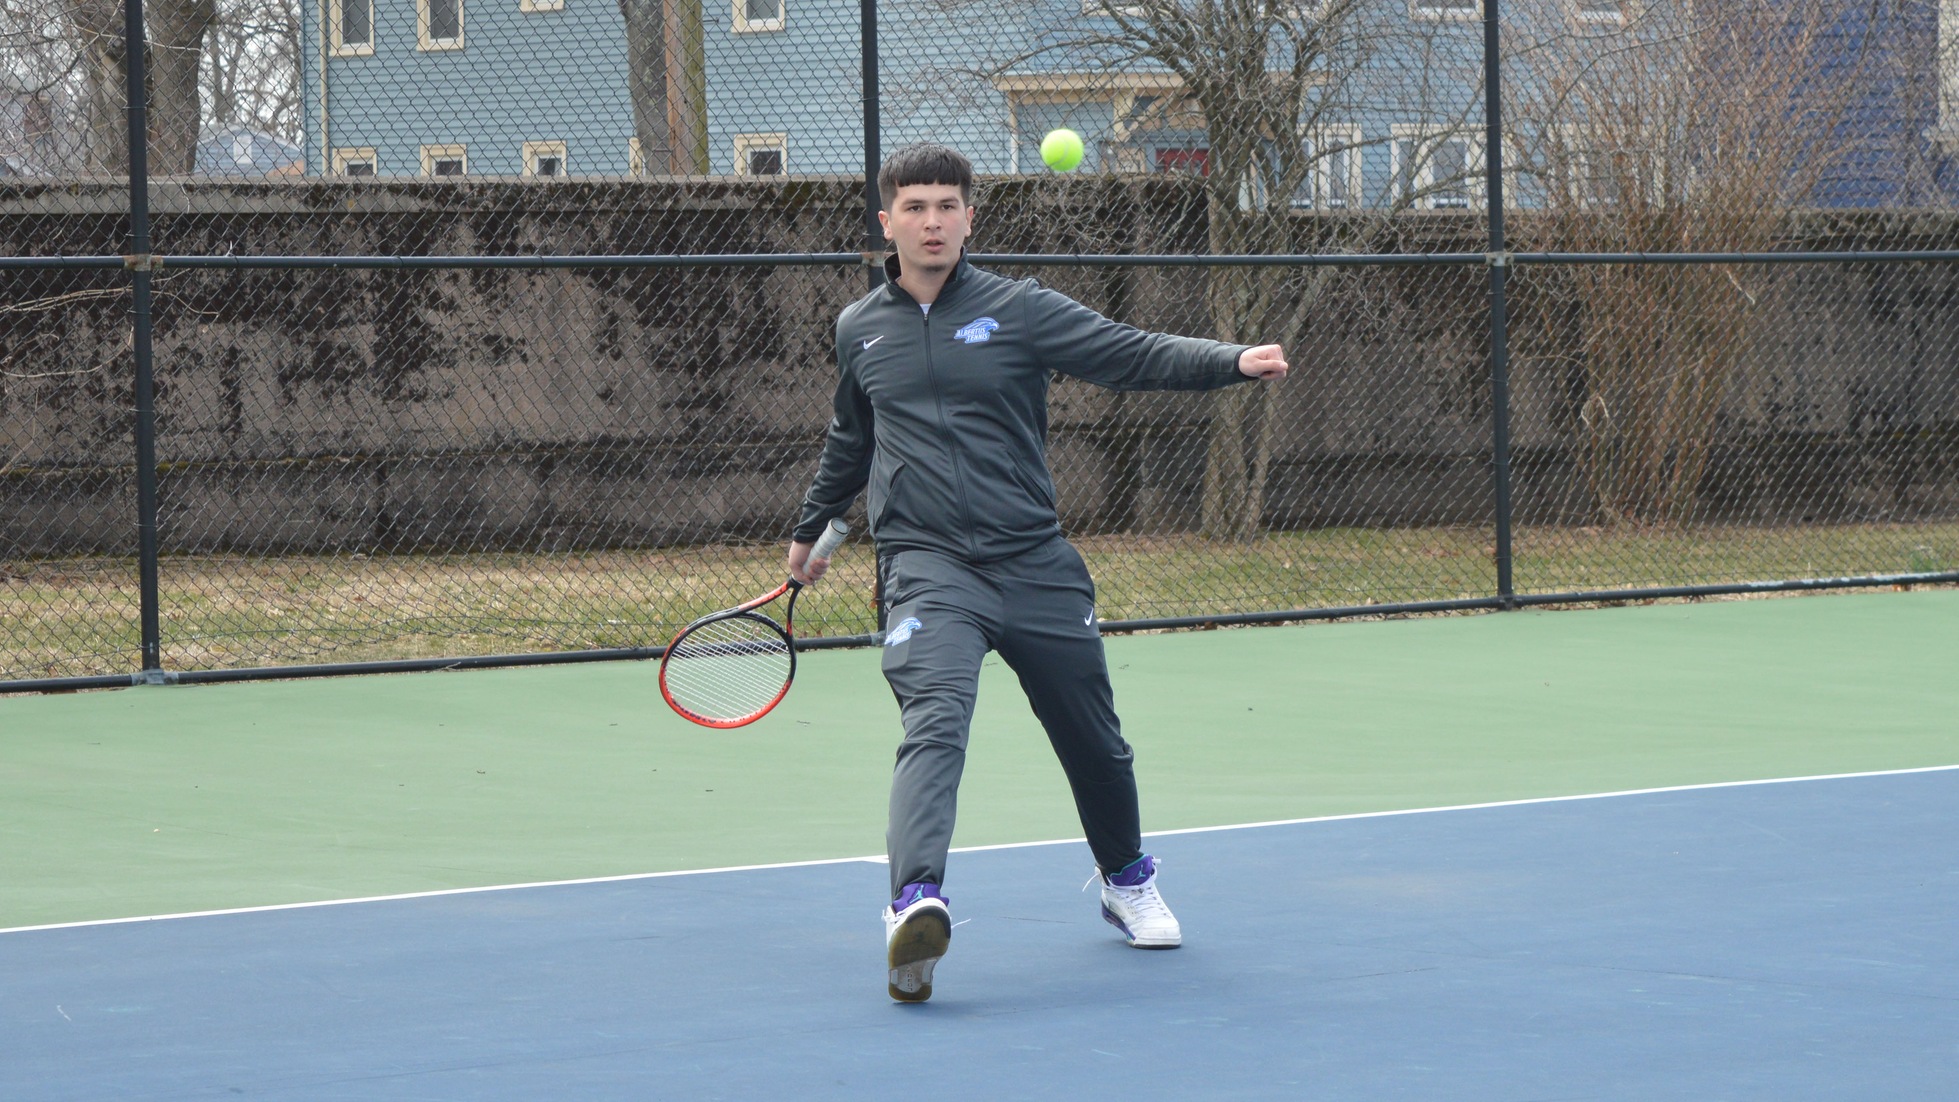 Men's Tennis Falls at Home to Colby Sawyer